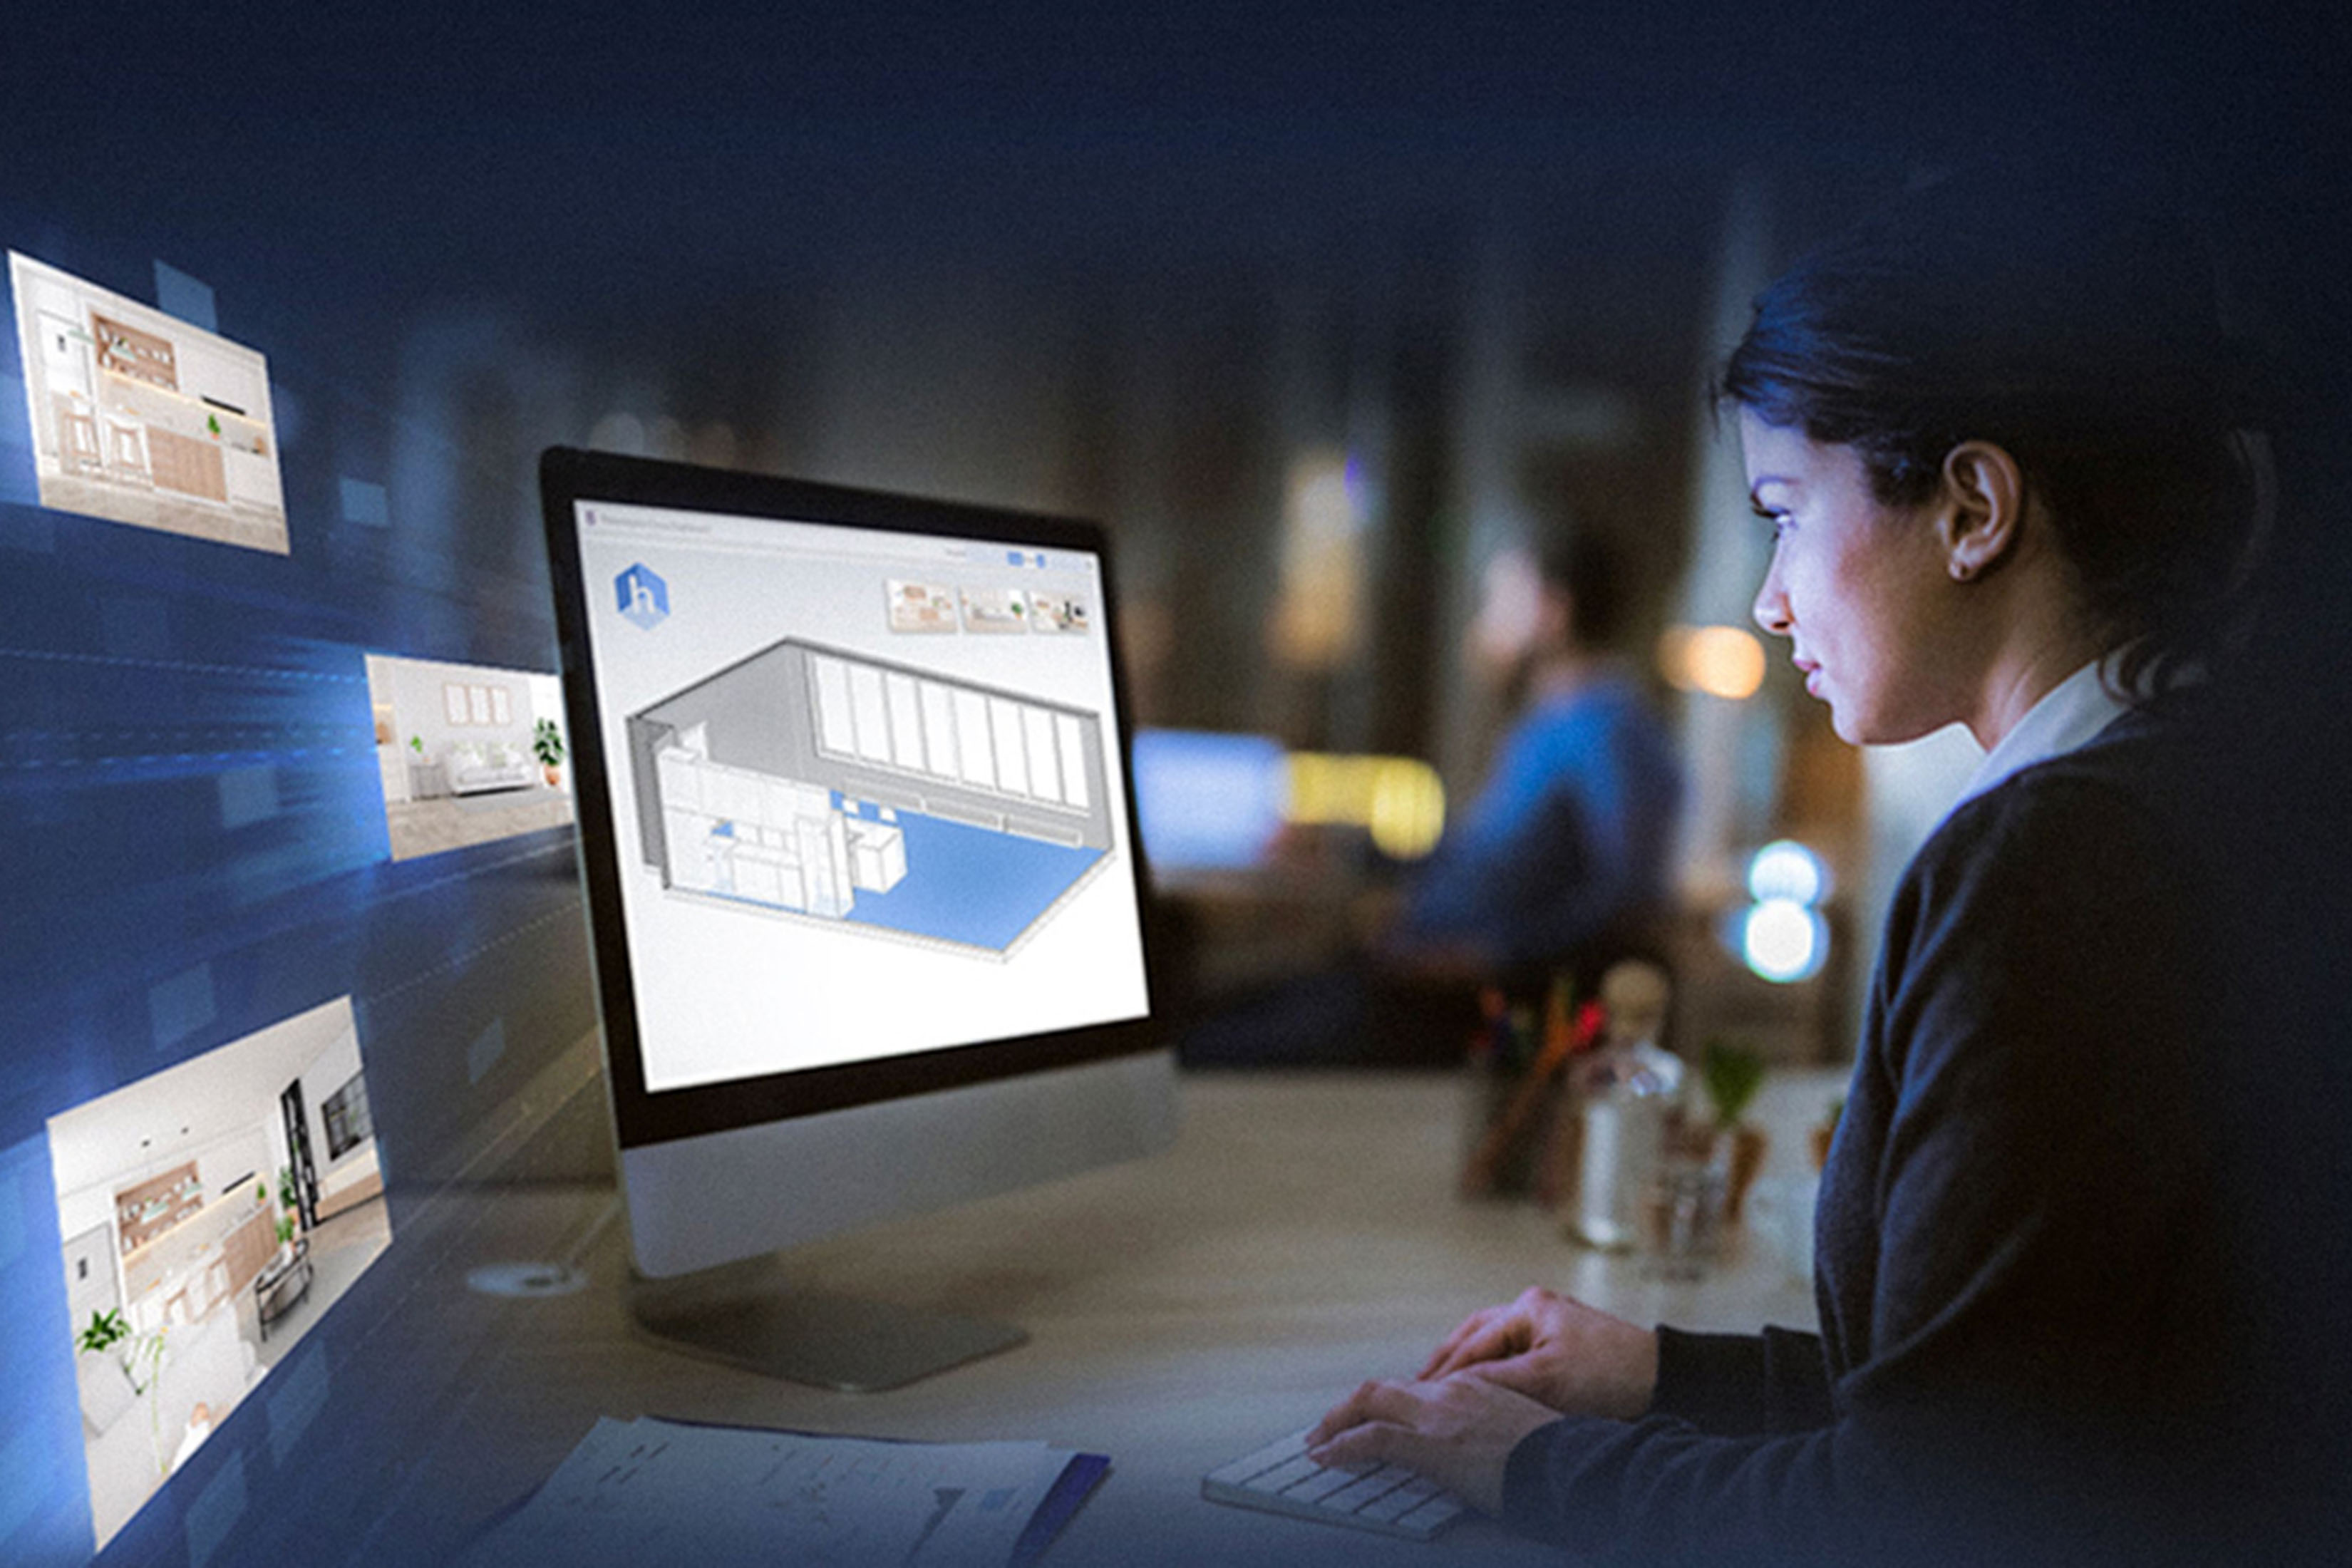 A woman looks at a rendering of a room on her laptop, with other screens showing room views floating around the laptop.